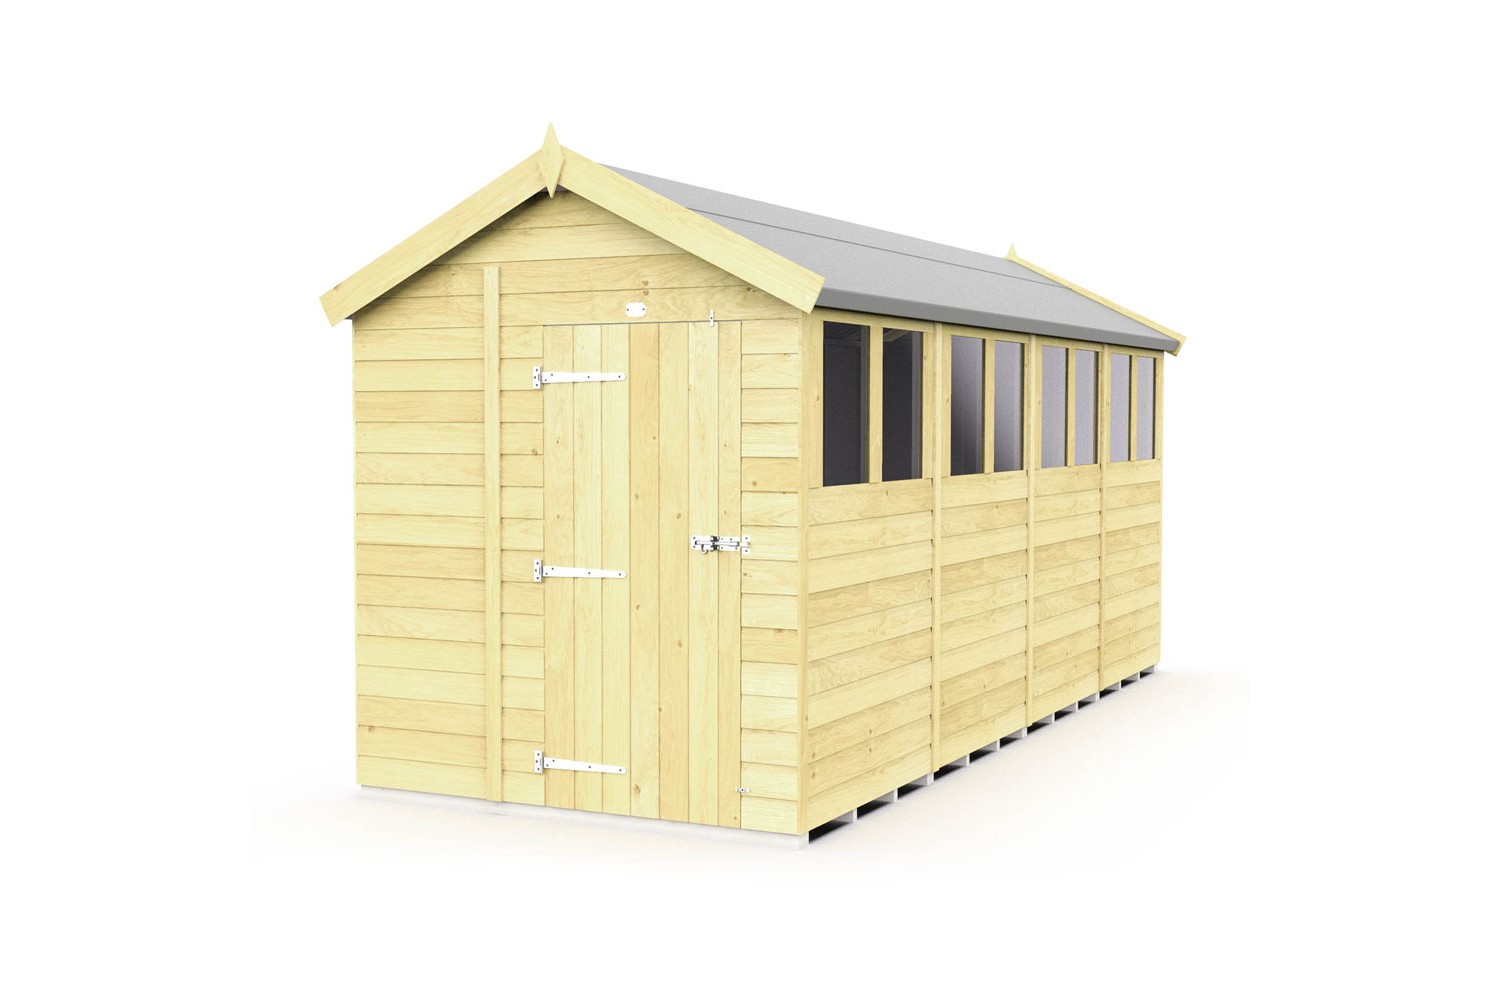 7ft x 16ft Apex Shed